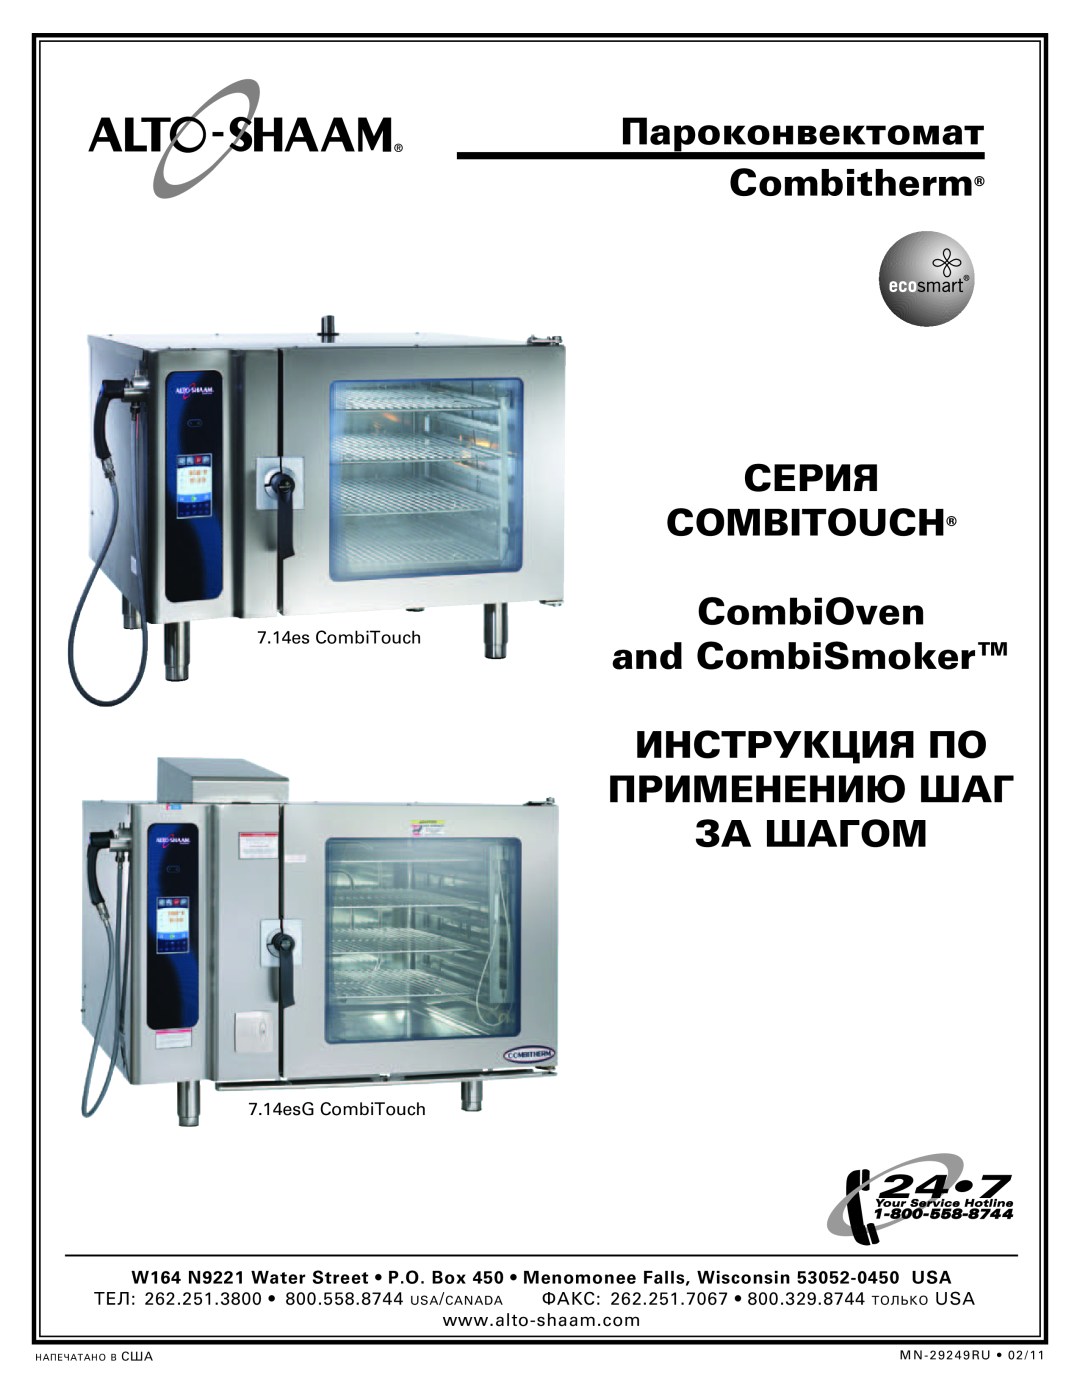 Alto-Shaam manual Пароконвектомат Combitherm Серия CombiTouch CombiOven and CombiSmoker, MN-29249RU 02/11 